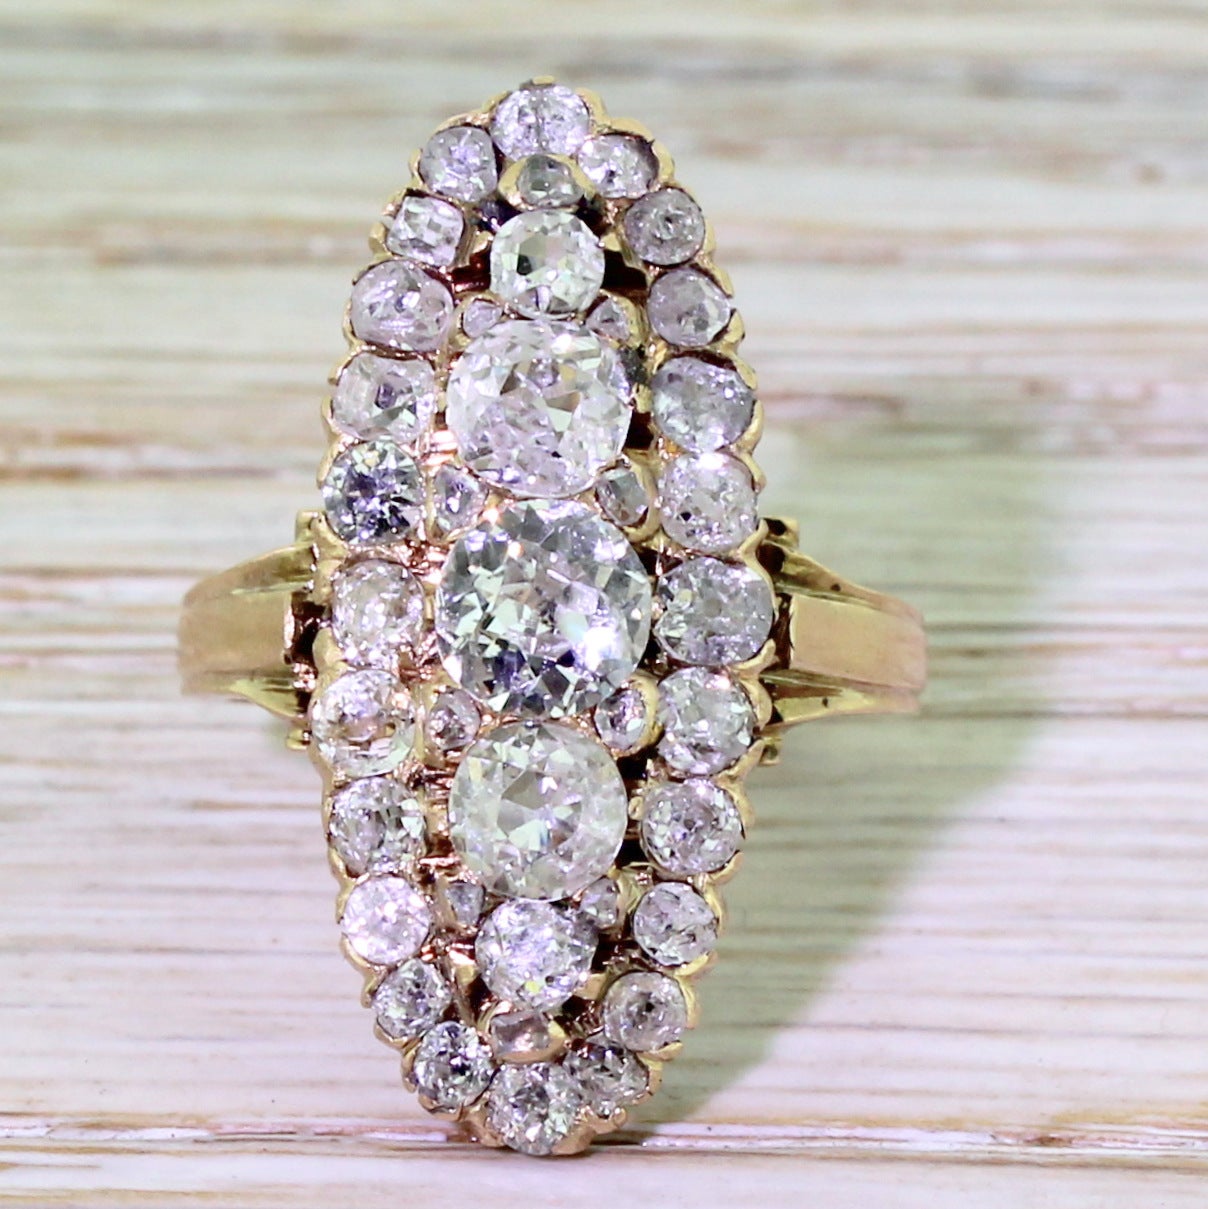 A magnificent late Victorian navette shaped cluster ring, set with an incredible 39 diamonds. The central cluster features five diamonds of graduating size inter-set with ten “spacer” diamonds. A further 24 diamonds encircle this in a graceful long